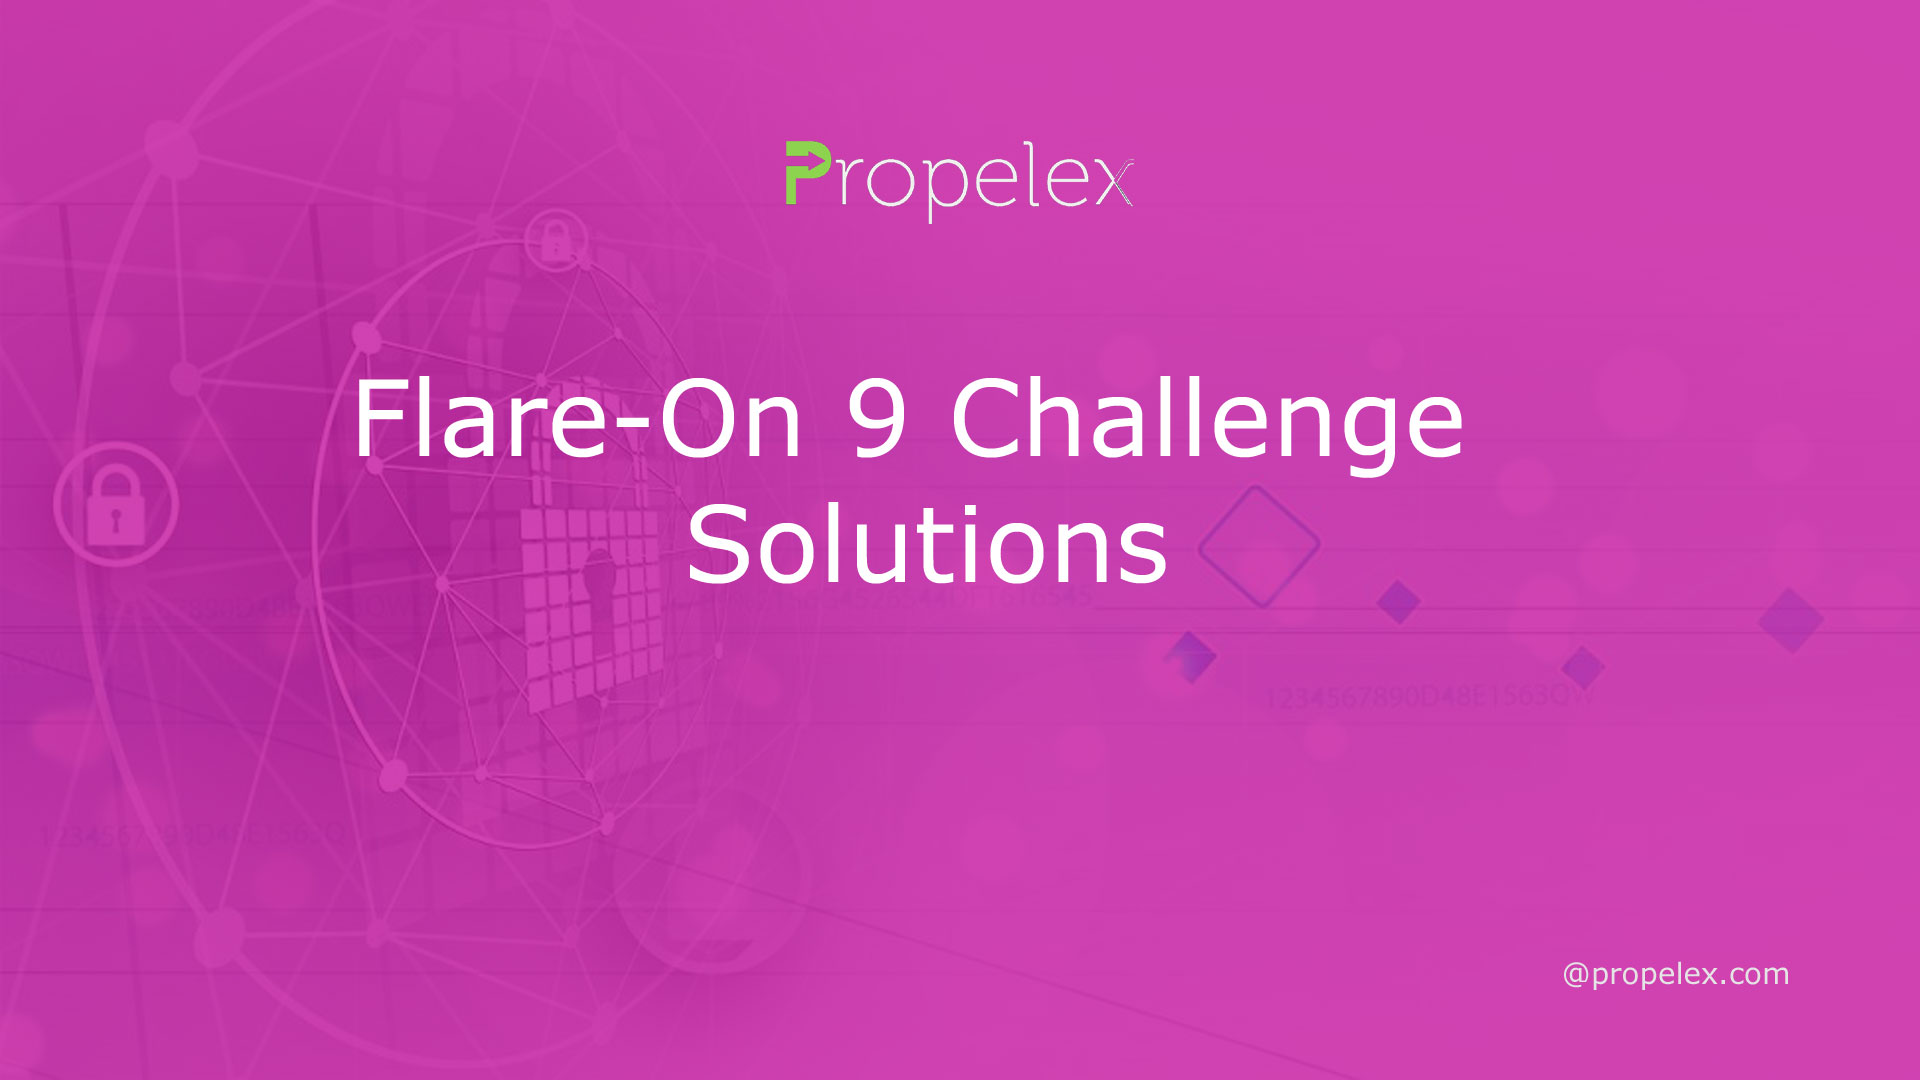 Flare-On 9 Challenge Solutions